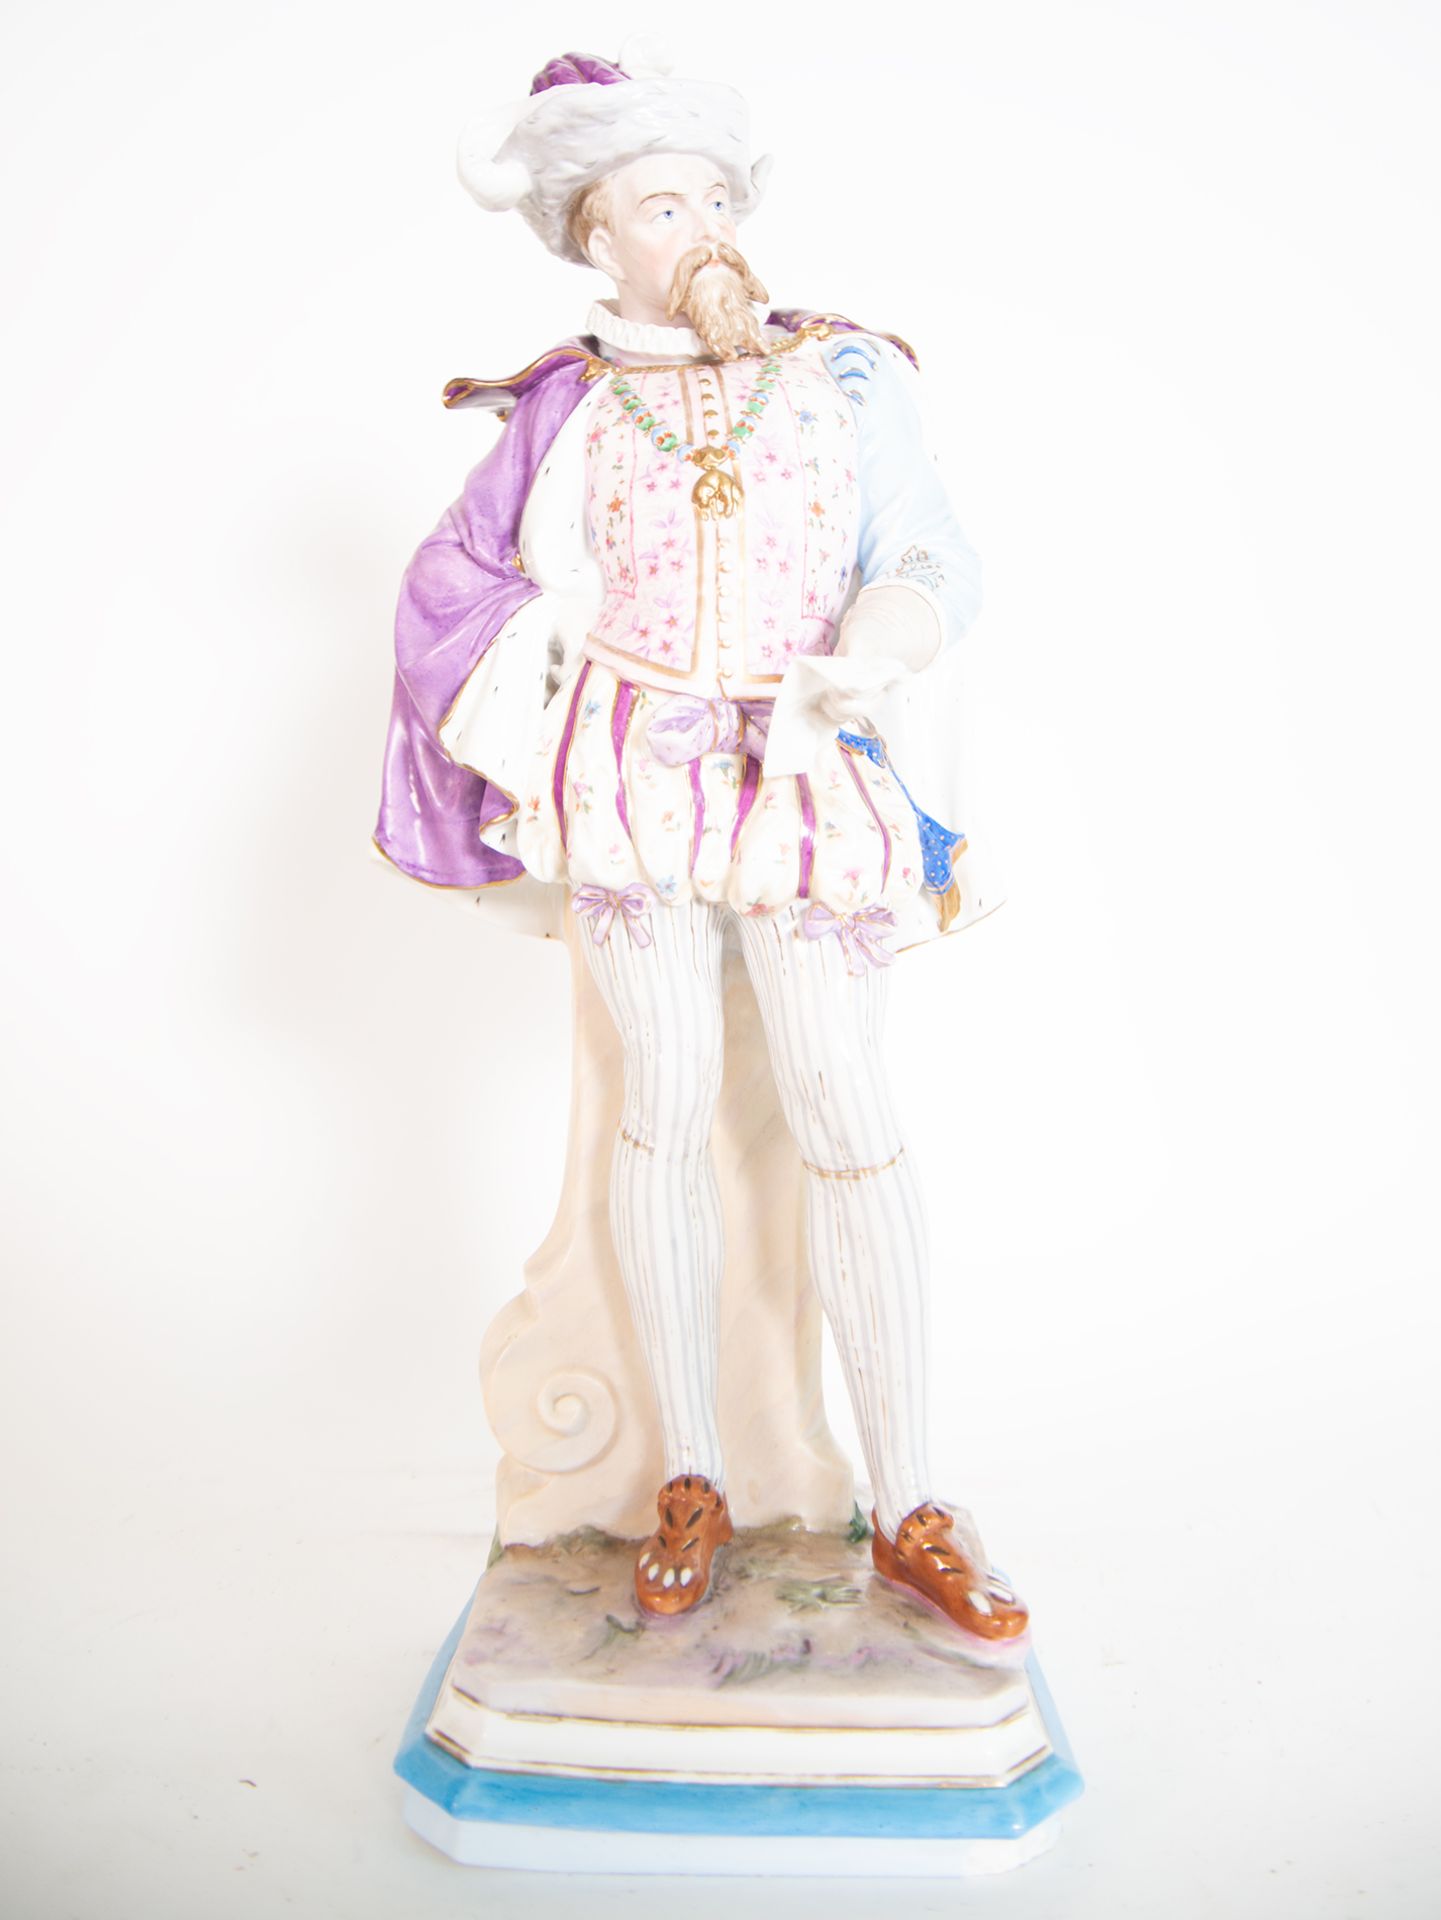 Lady and Gentleman in Polychrome Biscuit Porcelain, Vienna, 19th - 20th centuries - Image 2 of 8